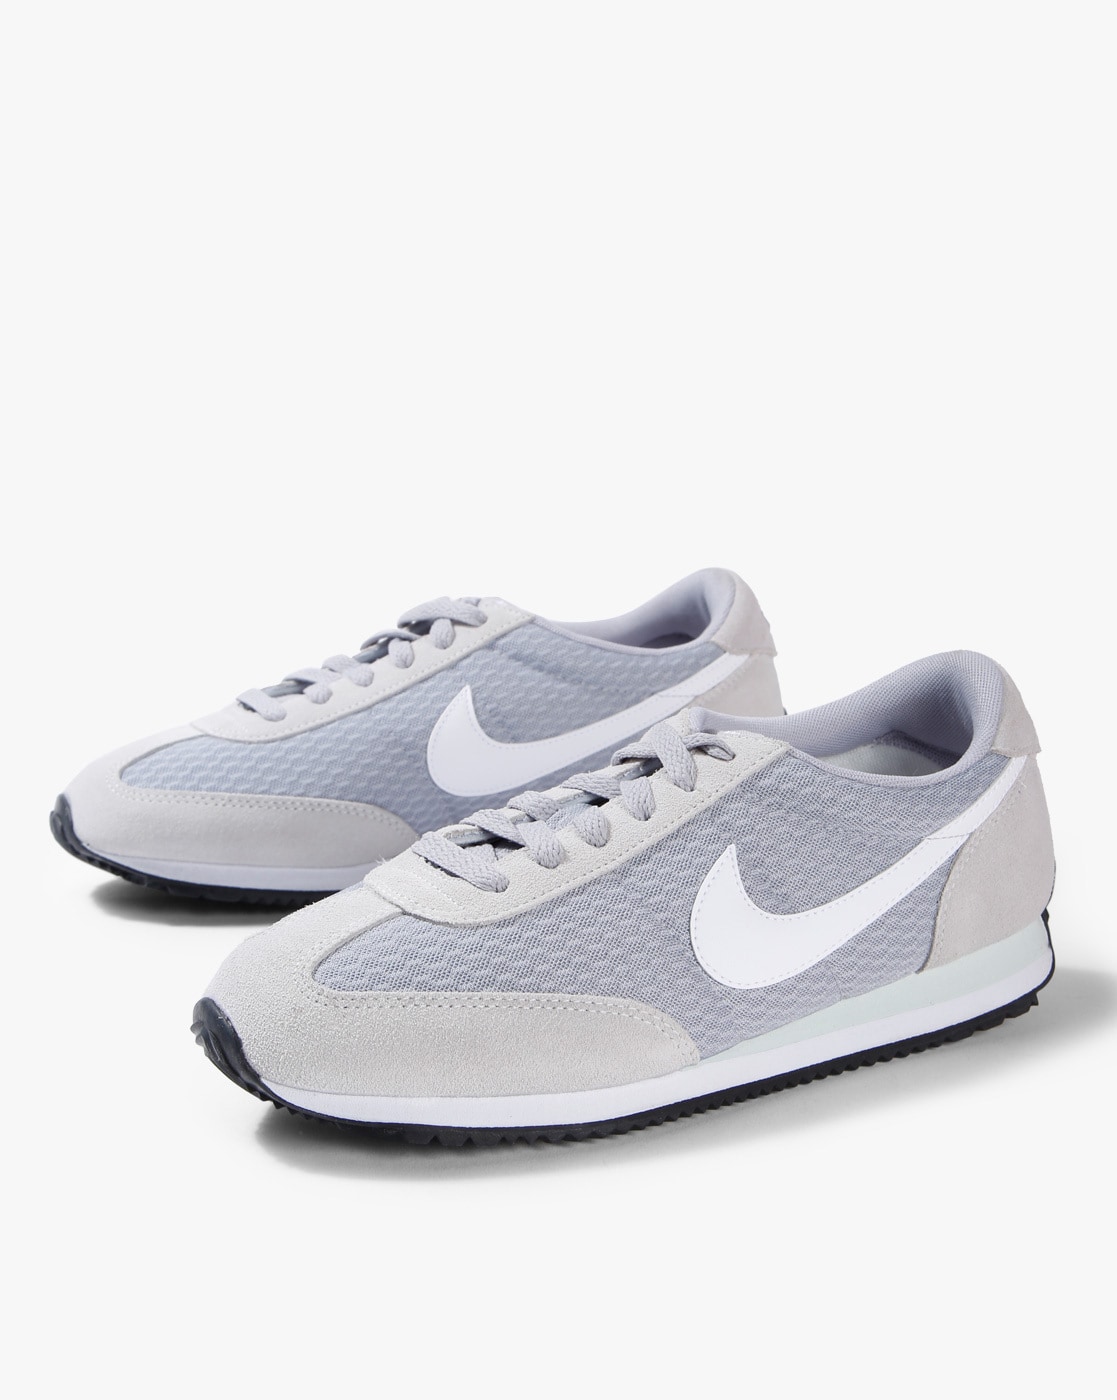 nike shoes for women online